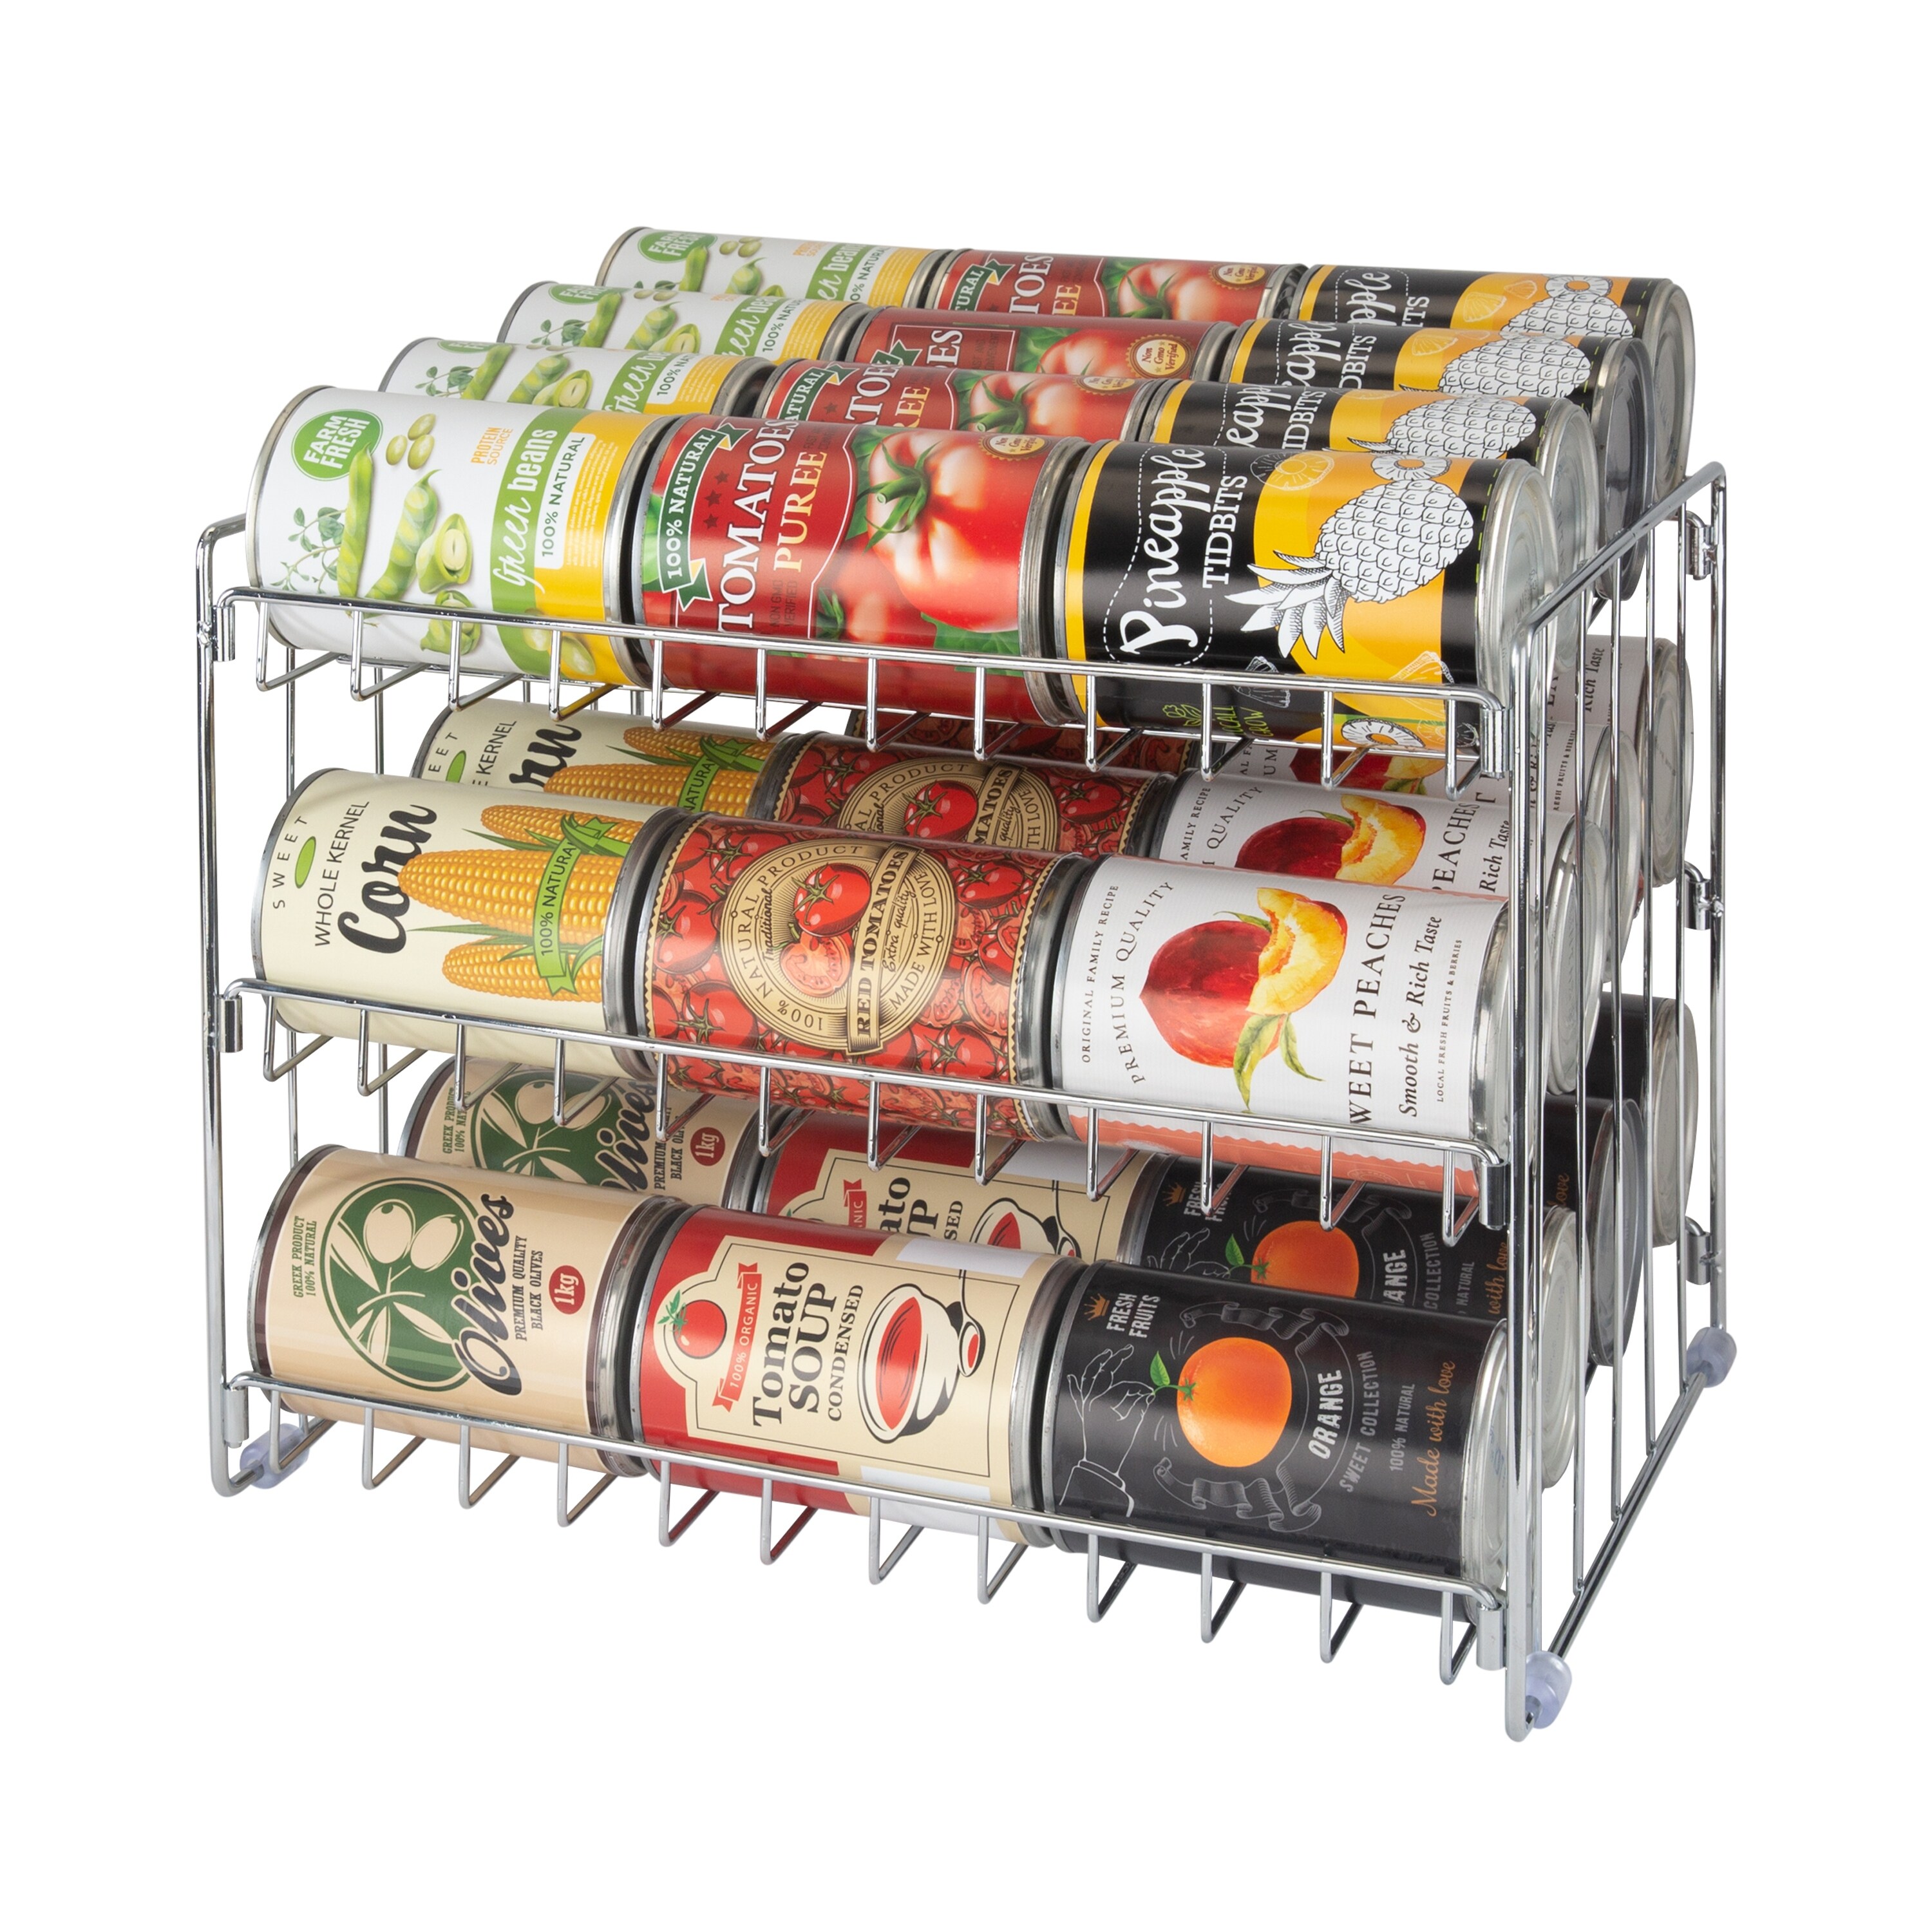 https://ak1.ostkcdn.com/images/products/is/images/direct/4d33fe02b206fd0f0def3aa0aee85e1ff0079b21/Kitchen-Details-3-Tier-Can-Storage-Organizer-Rack.jpg